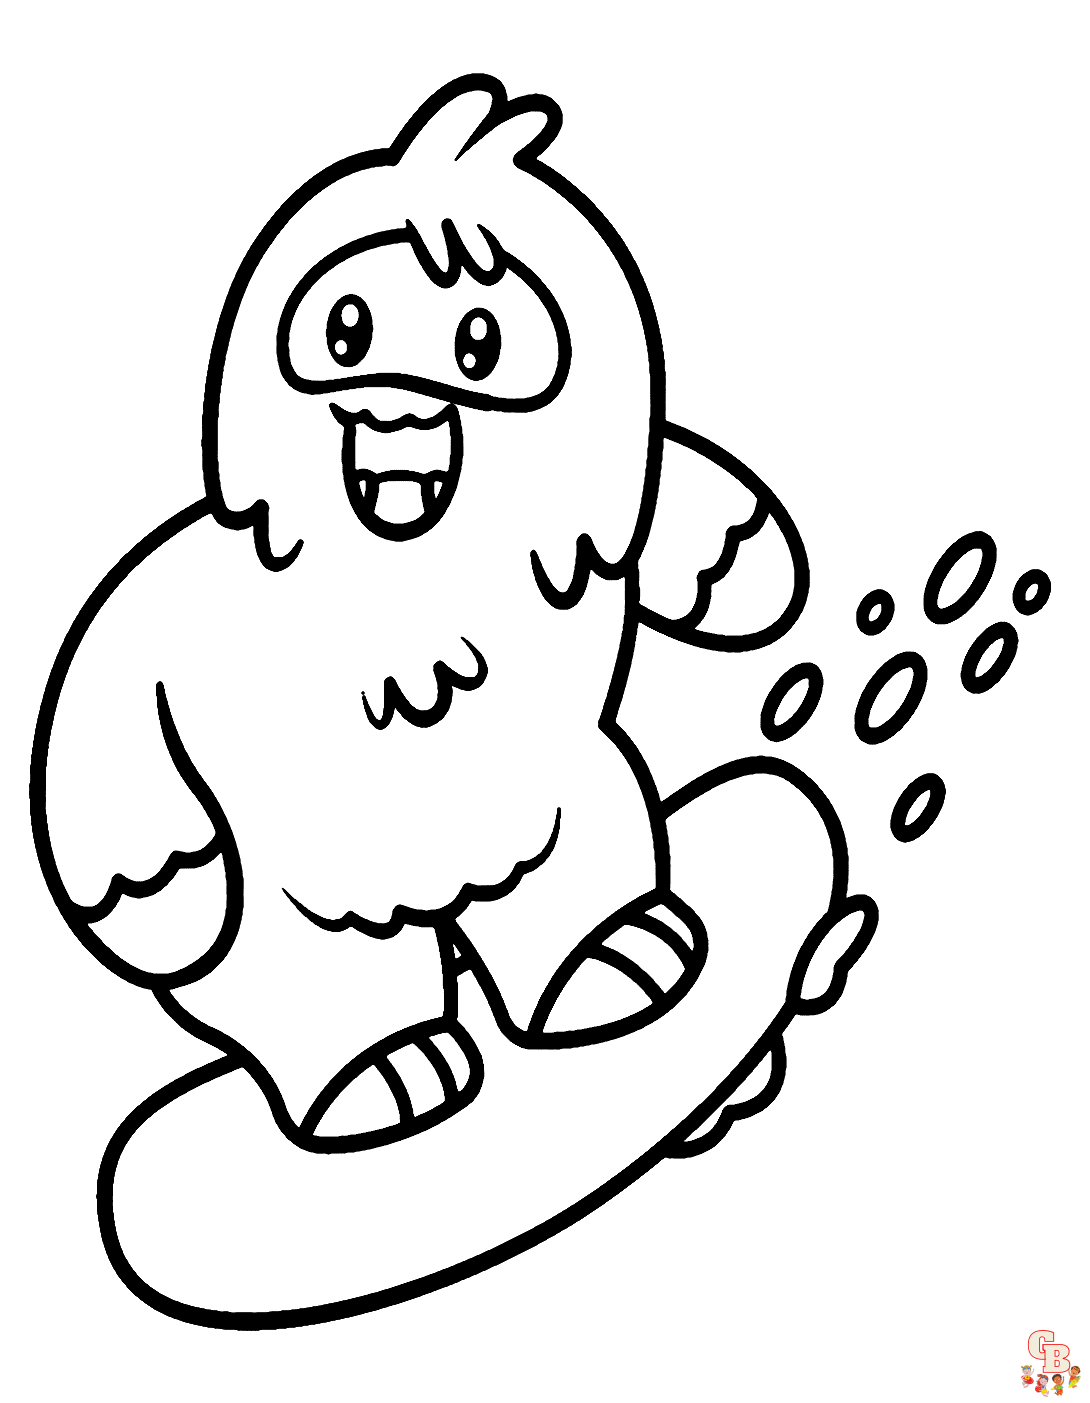 Printable yeti coloring pages free for kids and adults